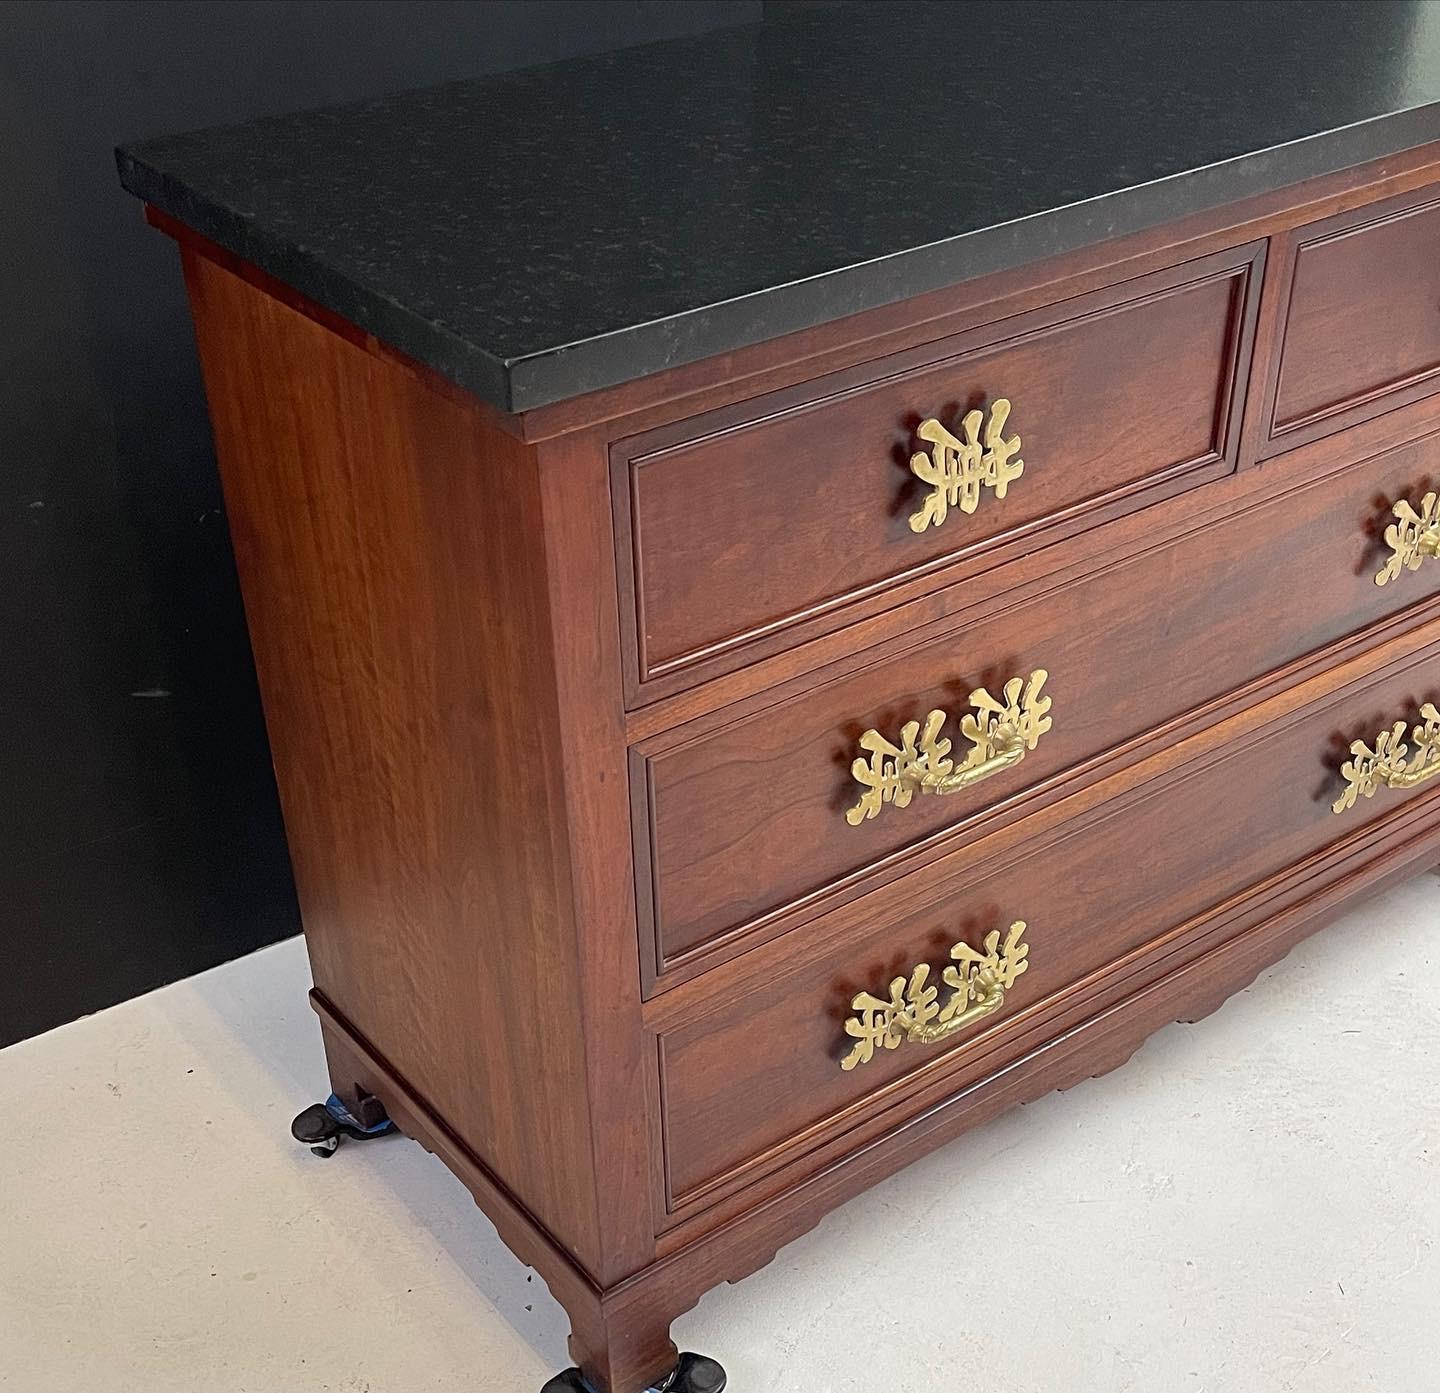 20th century fine quality chest of mahogany with a black leathered marble top over four beautifully paneled drawers. The case rests on four feet with connecting aprons all having Ming style details. Heavy cast bronze Chinese calligraphy characters